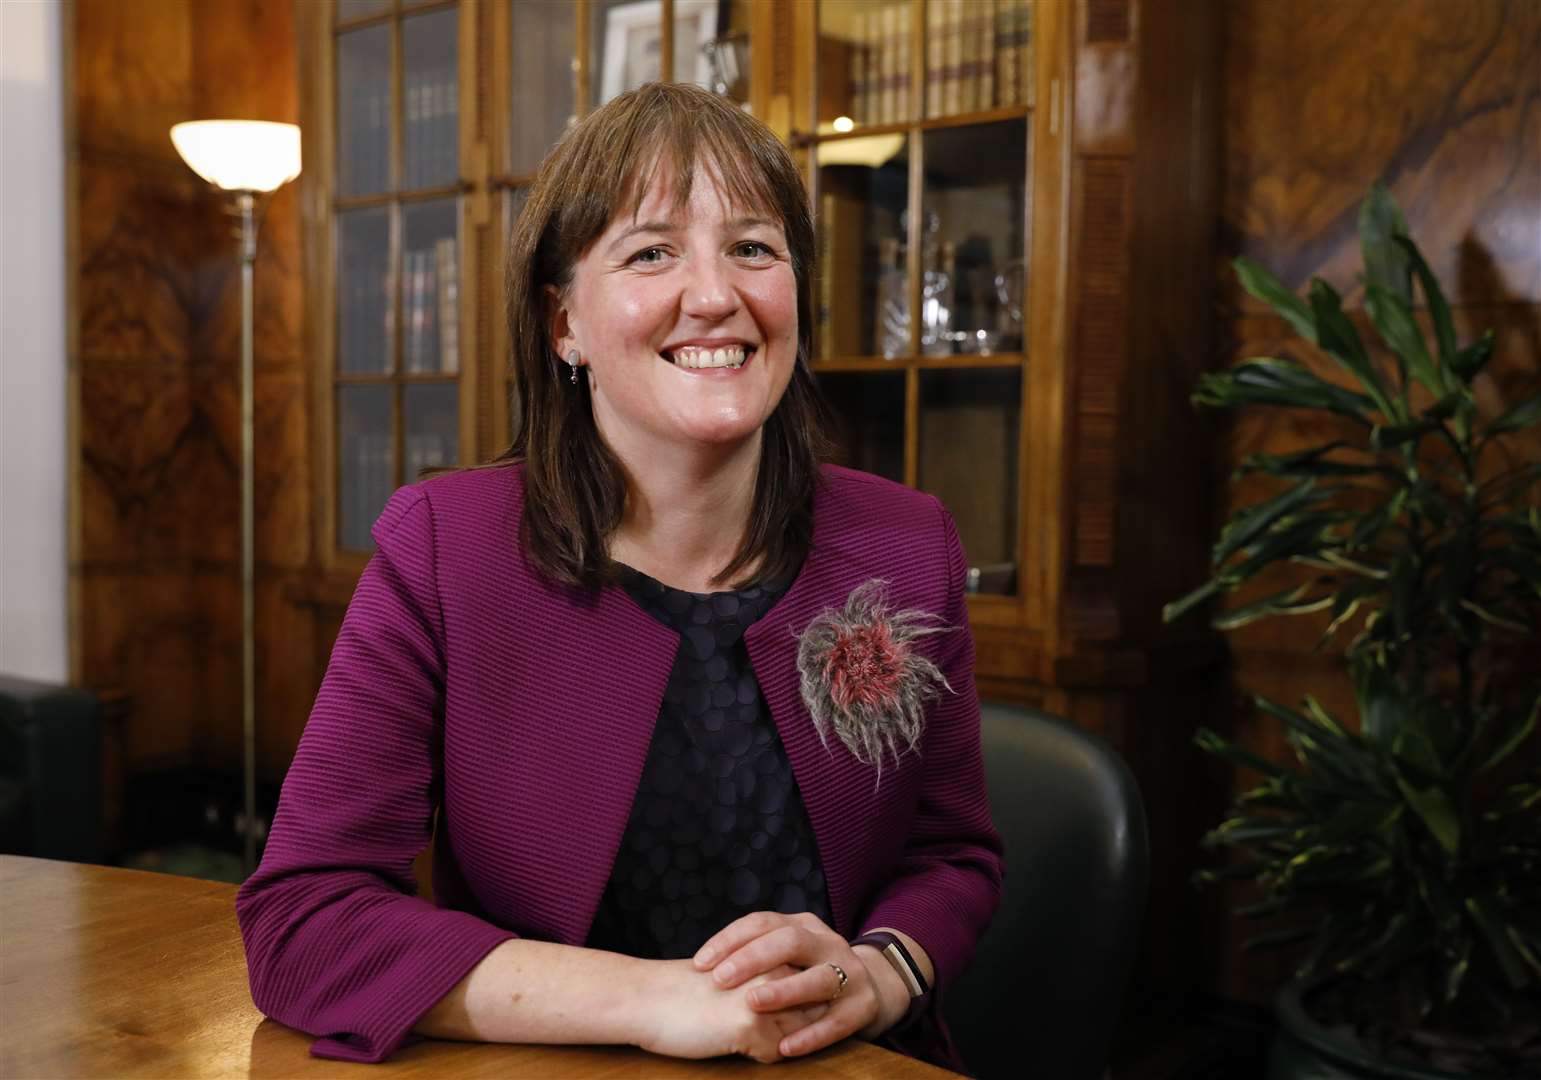 Maree Todd is a Highlands and Islands MSP and Scotland's minister for children and young people. Picture: Scottish Government